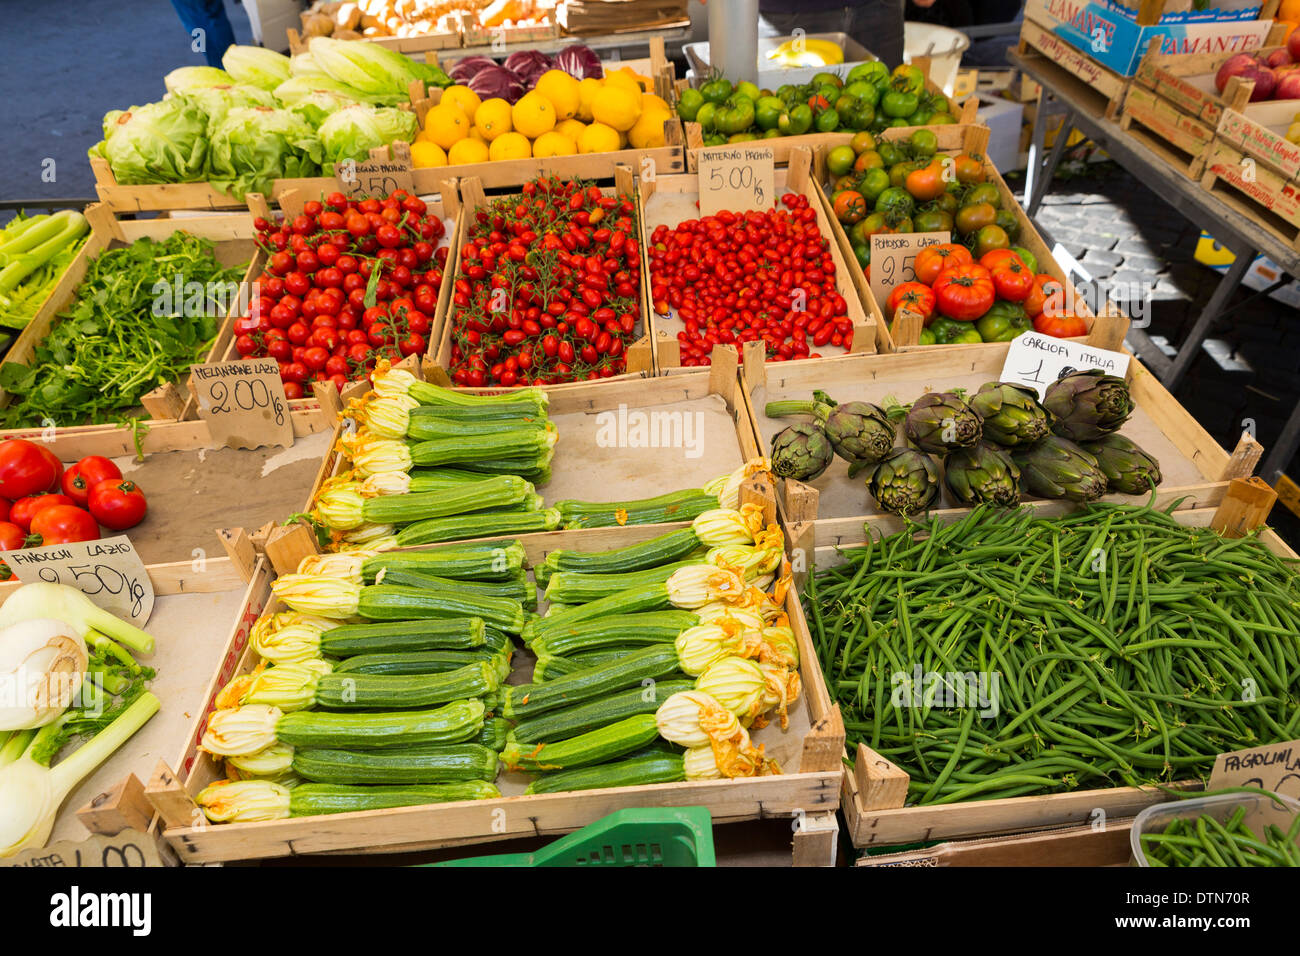 Vegetables on sale at an Italian fruit and vegetable market Stock Photo